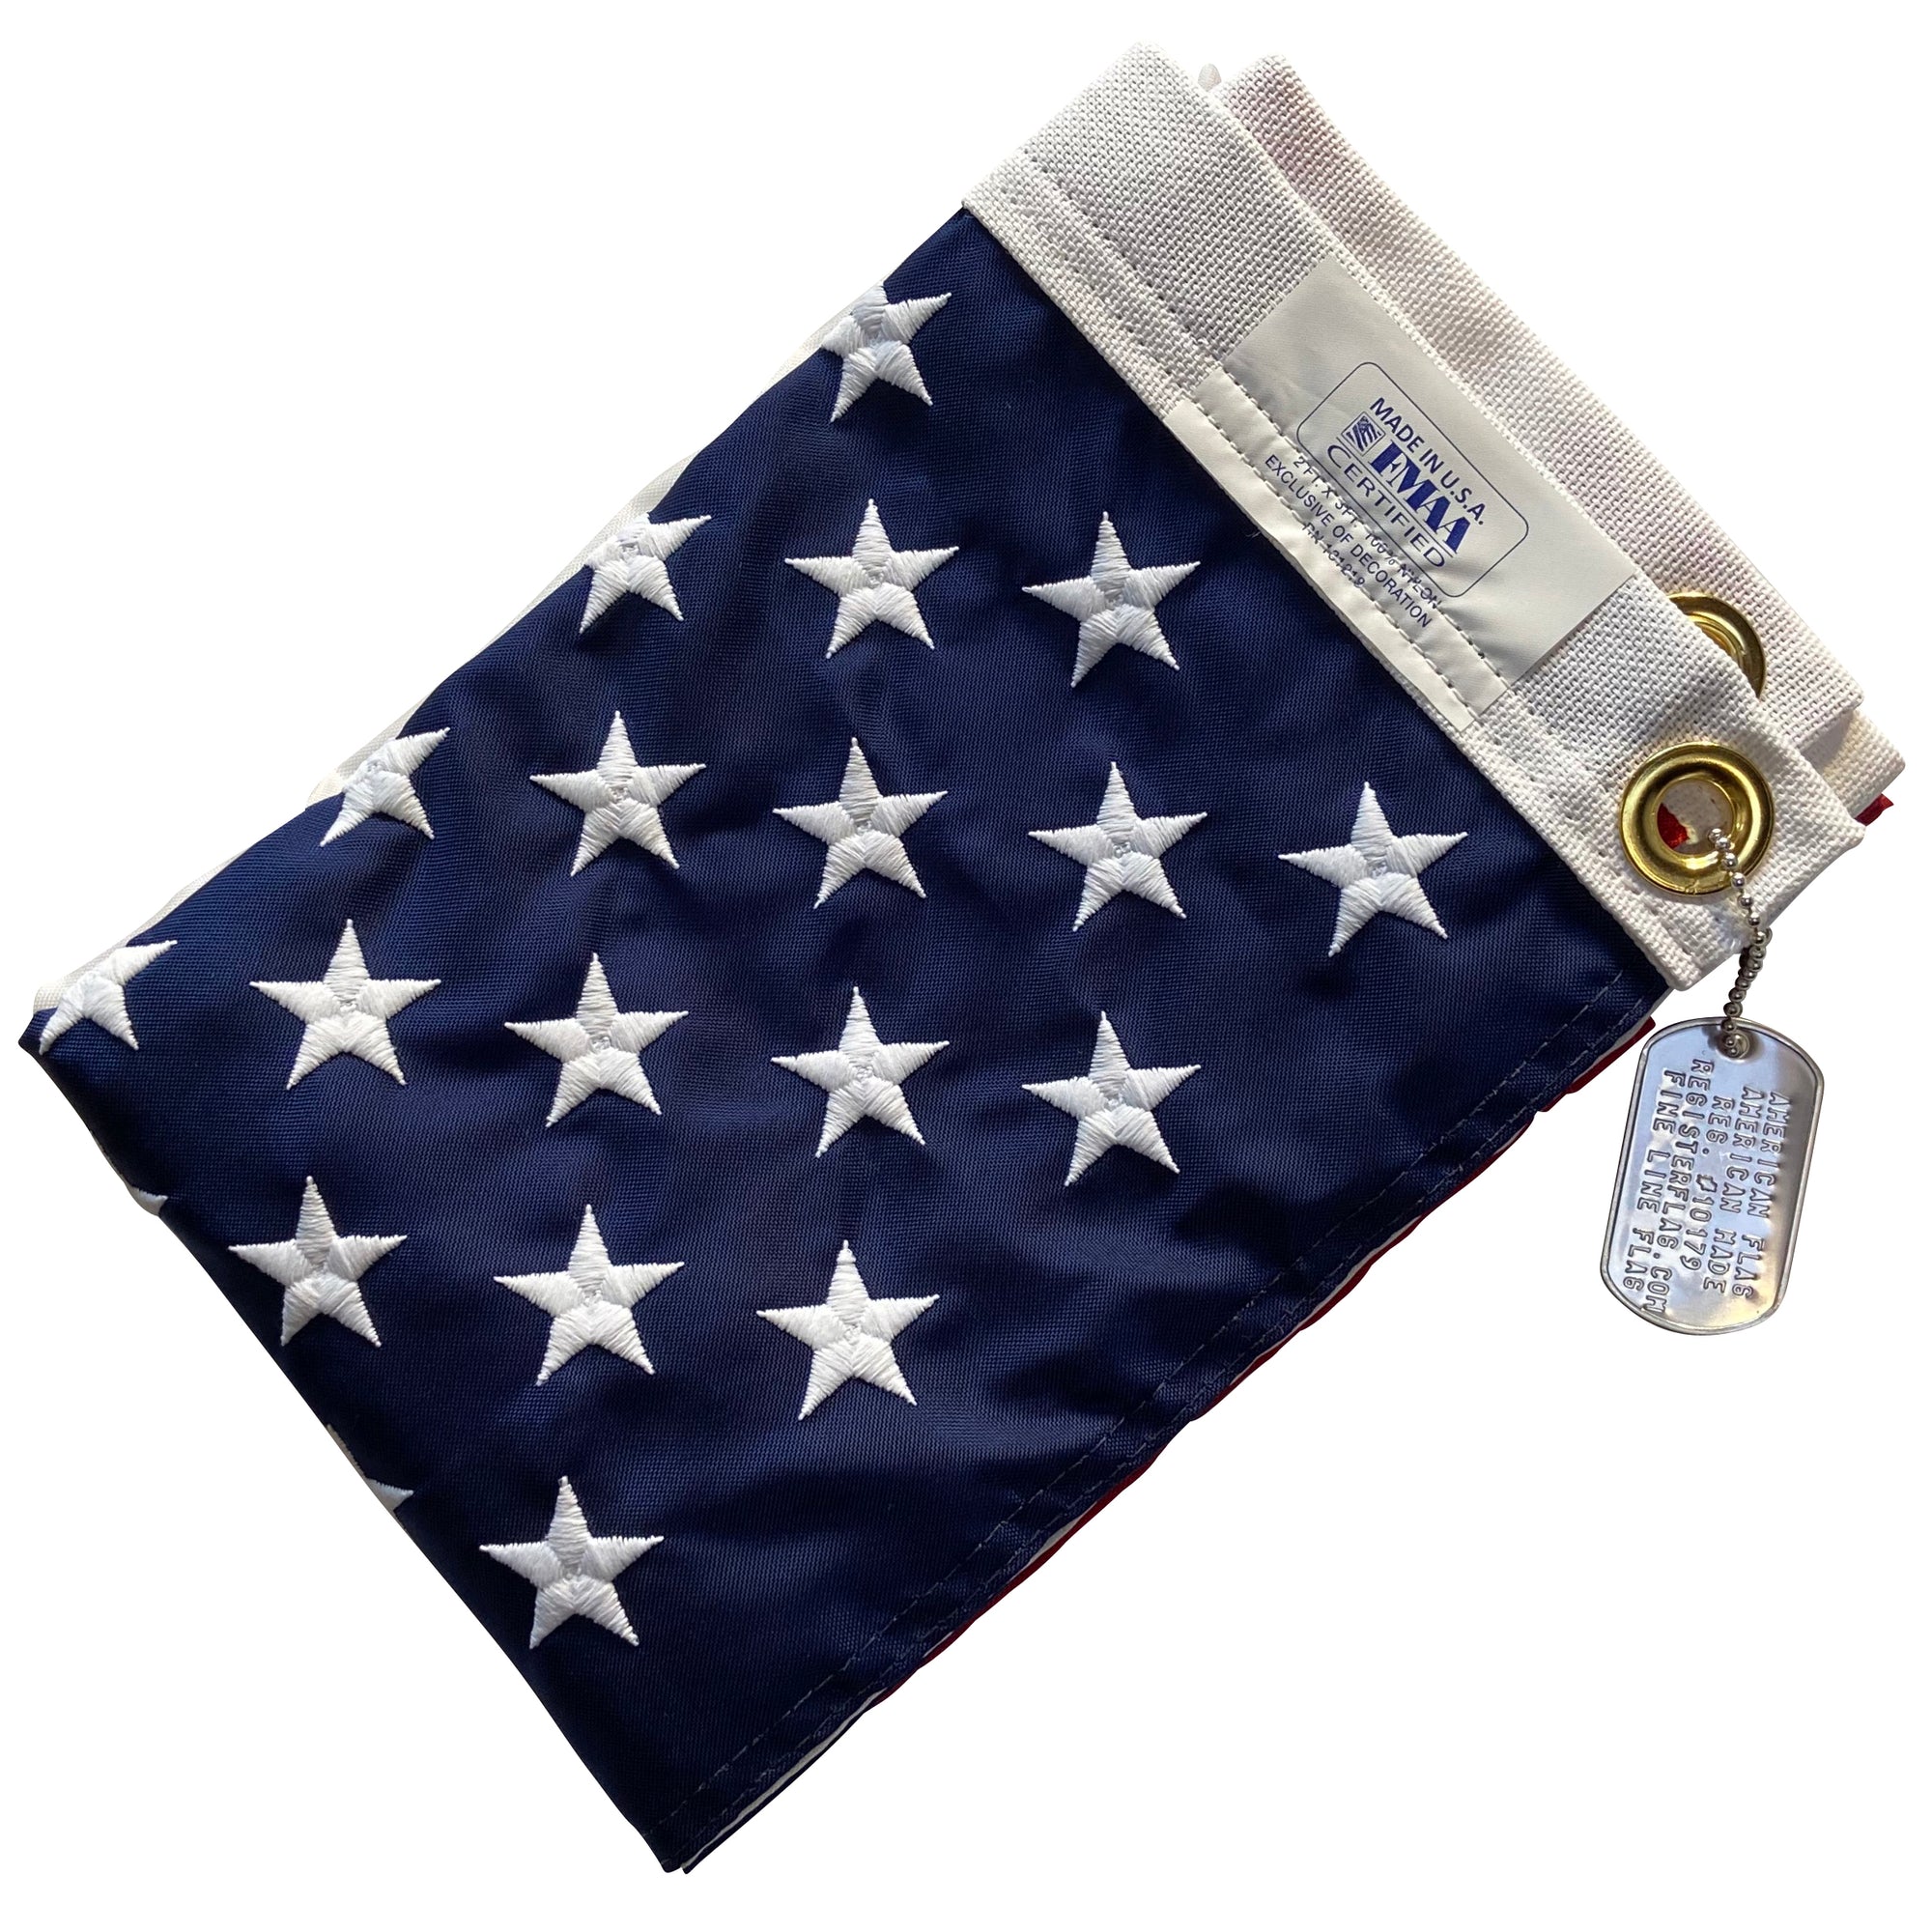 2x3 Foot American Flag folded with dog tag